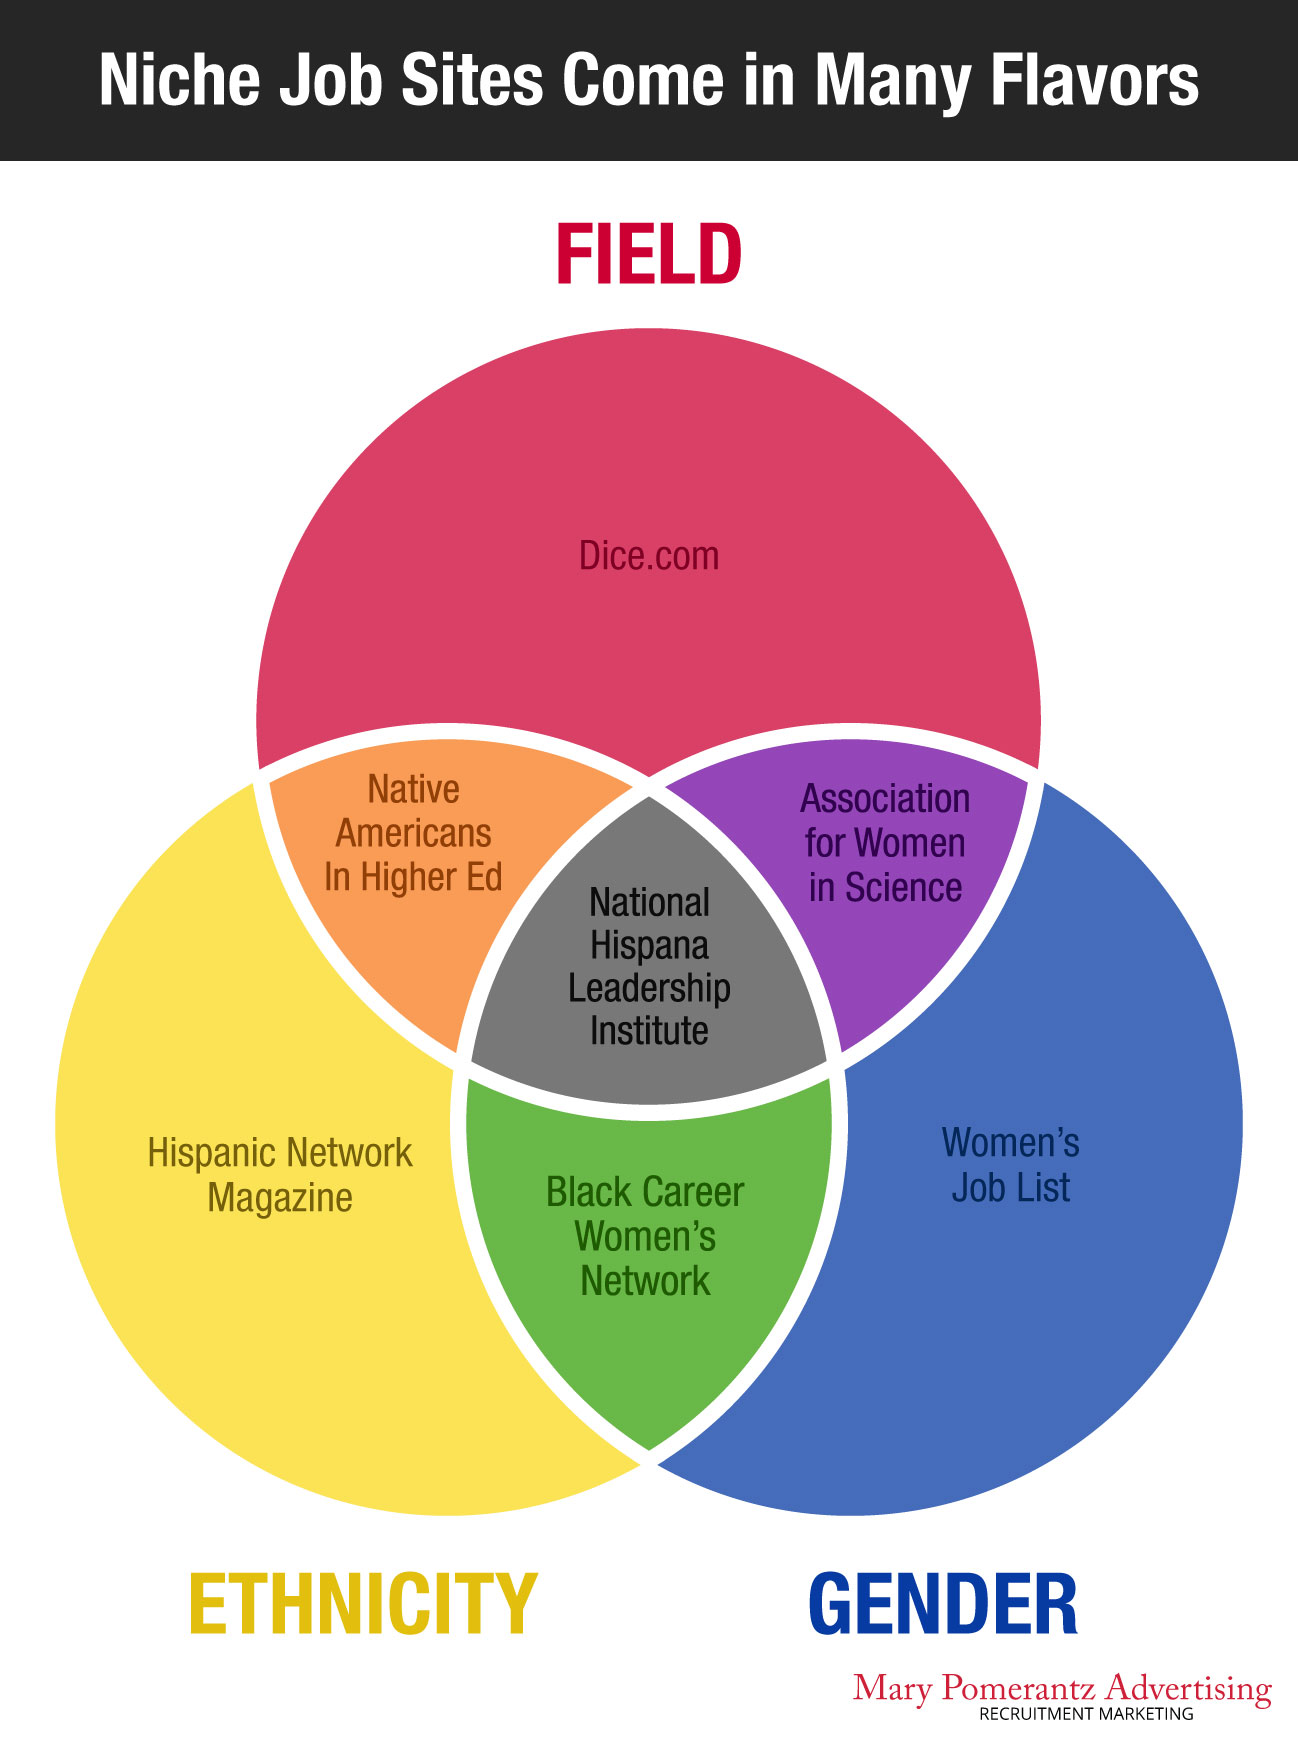 infographic using different color circles to indicate diversity of niche job sites